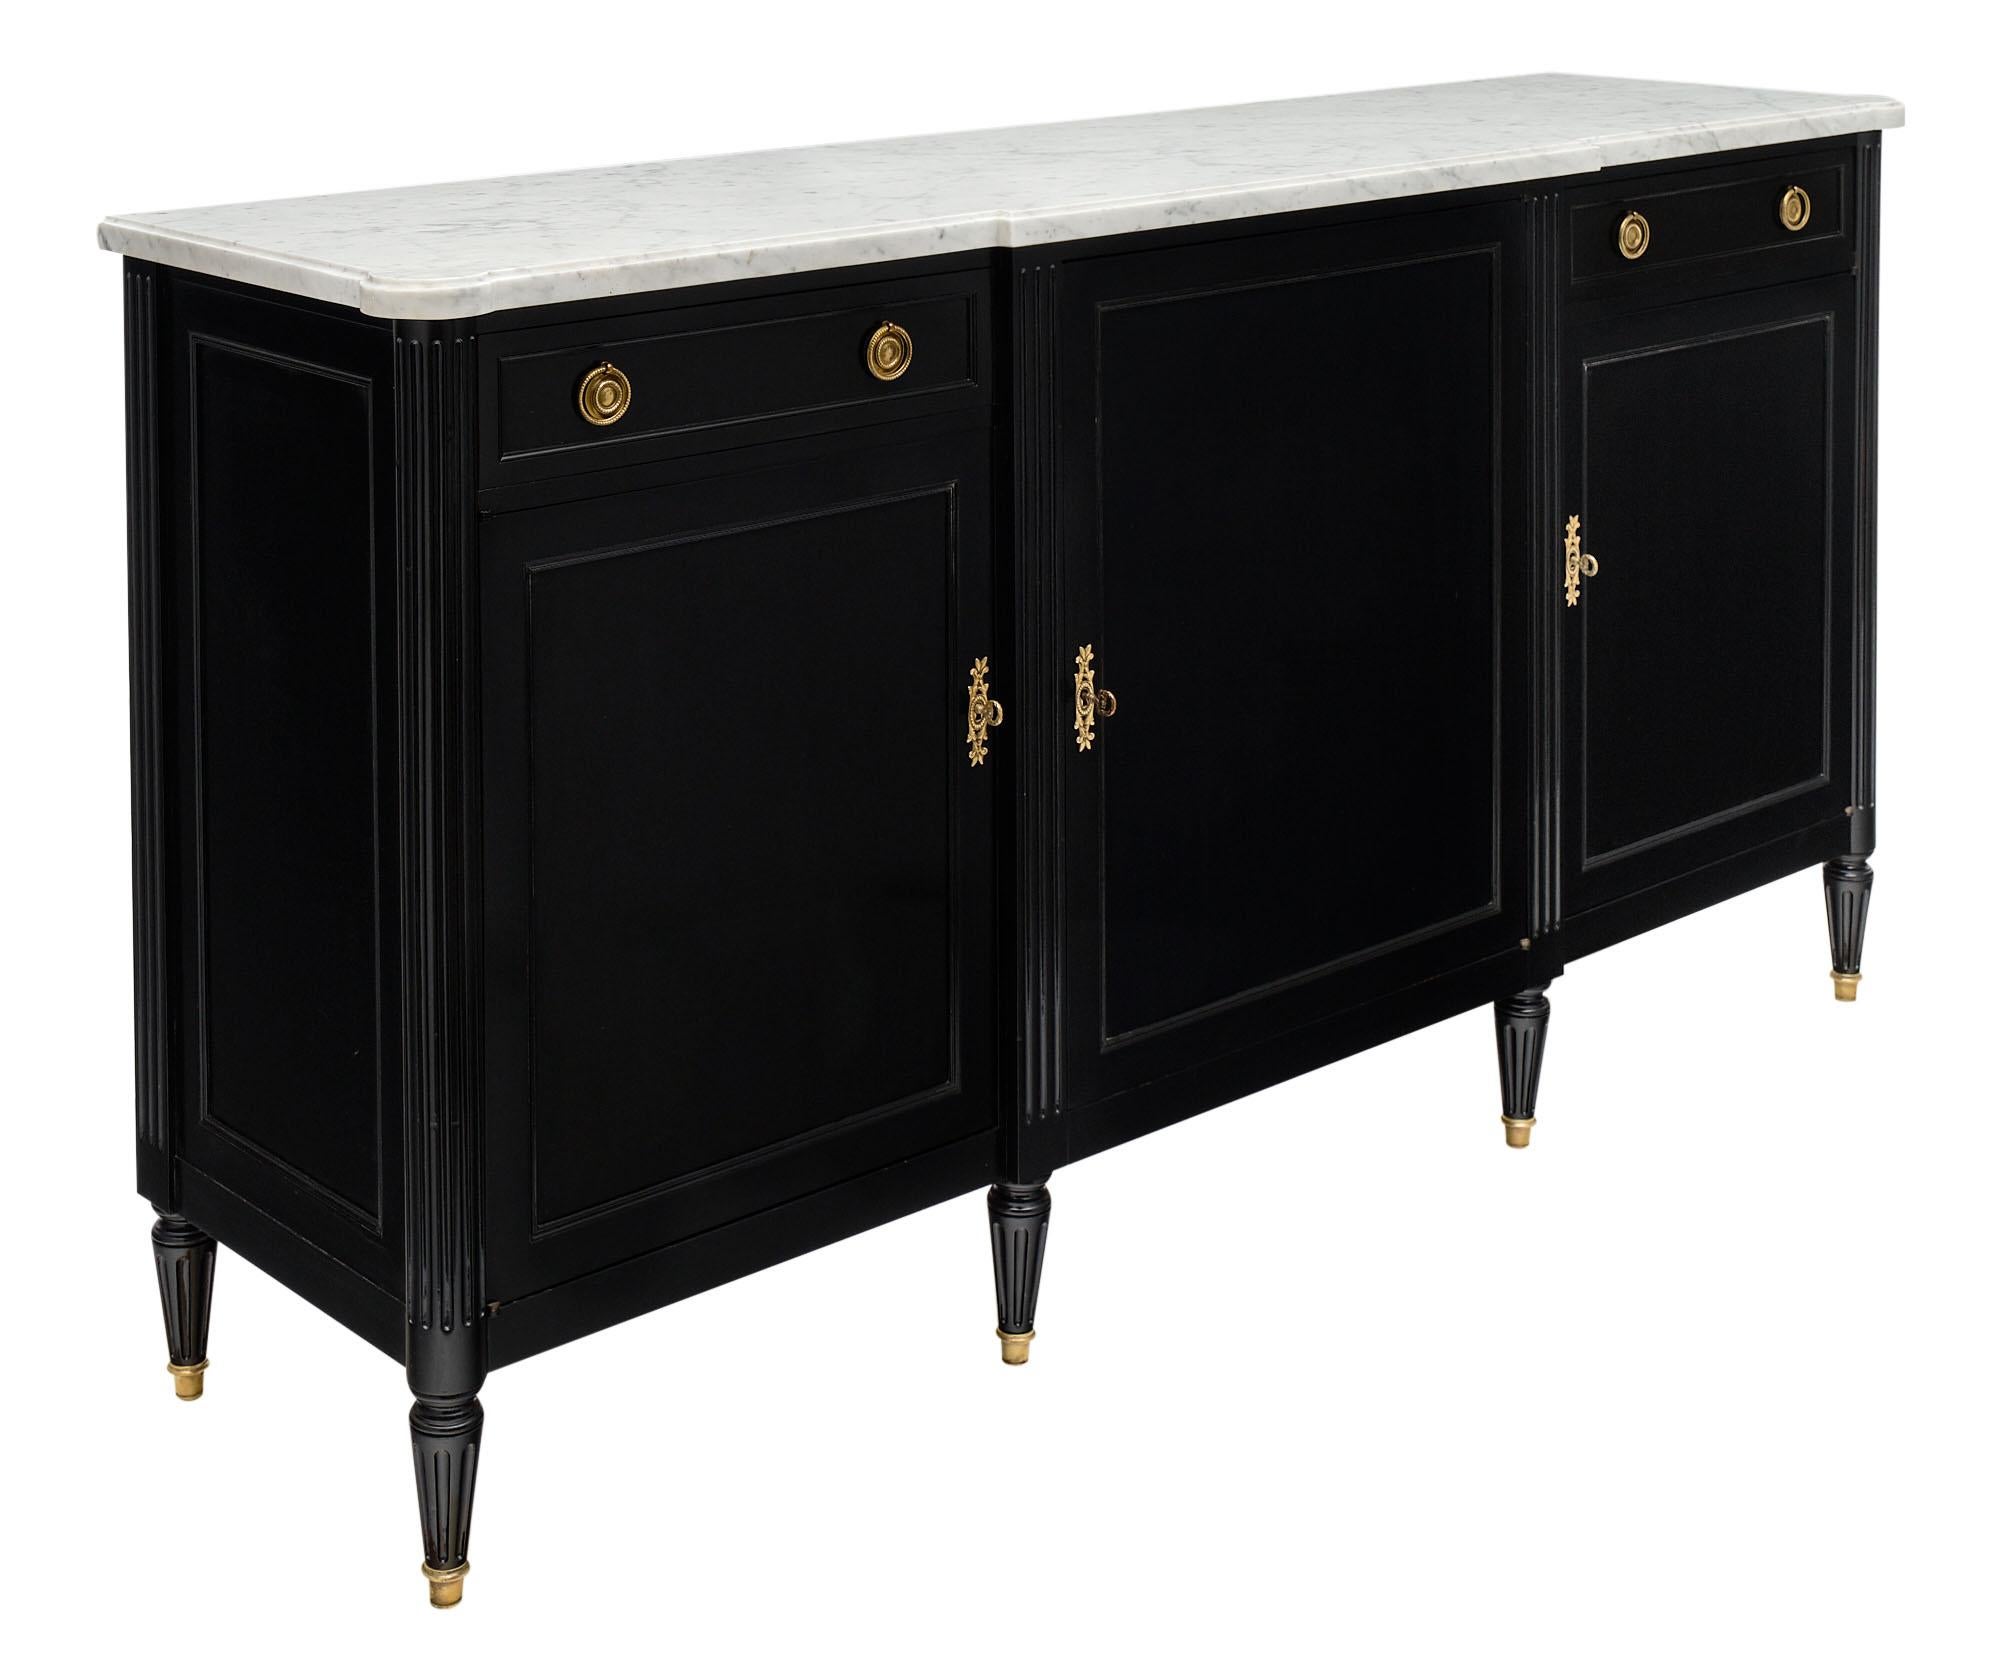 Ebonized Louis XVI Style antique buffet made of mahogany and ebonized with a museum quality French polish finish. We love the finely case gilt bronze hardware; tapered legs; and classically crafted details. It is topped with a beautiful Carrara